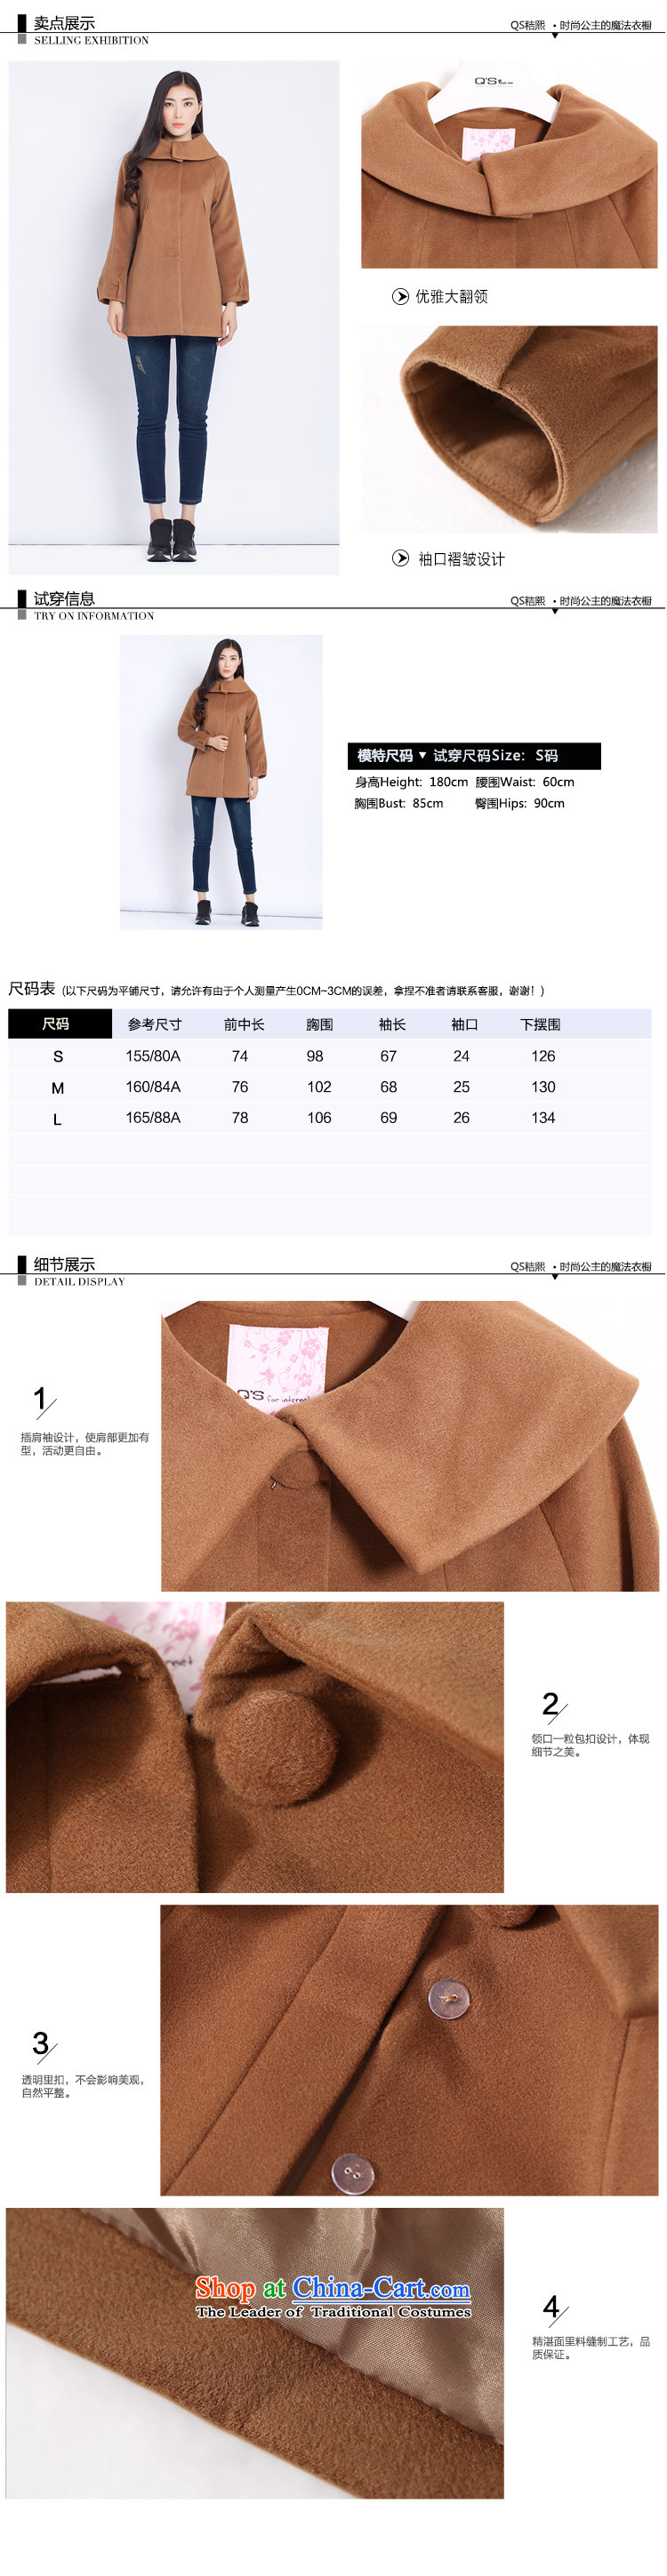 【 war-hee gross provided as soon as possible war? coats-hee is conduct gross? coats, national, and includes the lowest price QS gross coats web options? guides, as well as war-hee Gross Gross pictures, coat???, gross parameters coats coats comments, ideas and coat it Gross Gross coats techniques? information, I buy from the web? coats of gross-hee, assured and easy